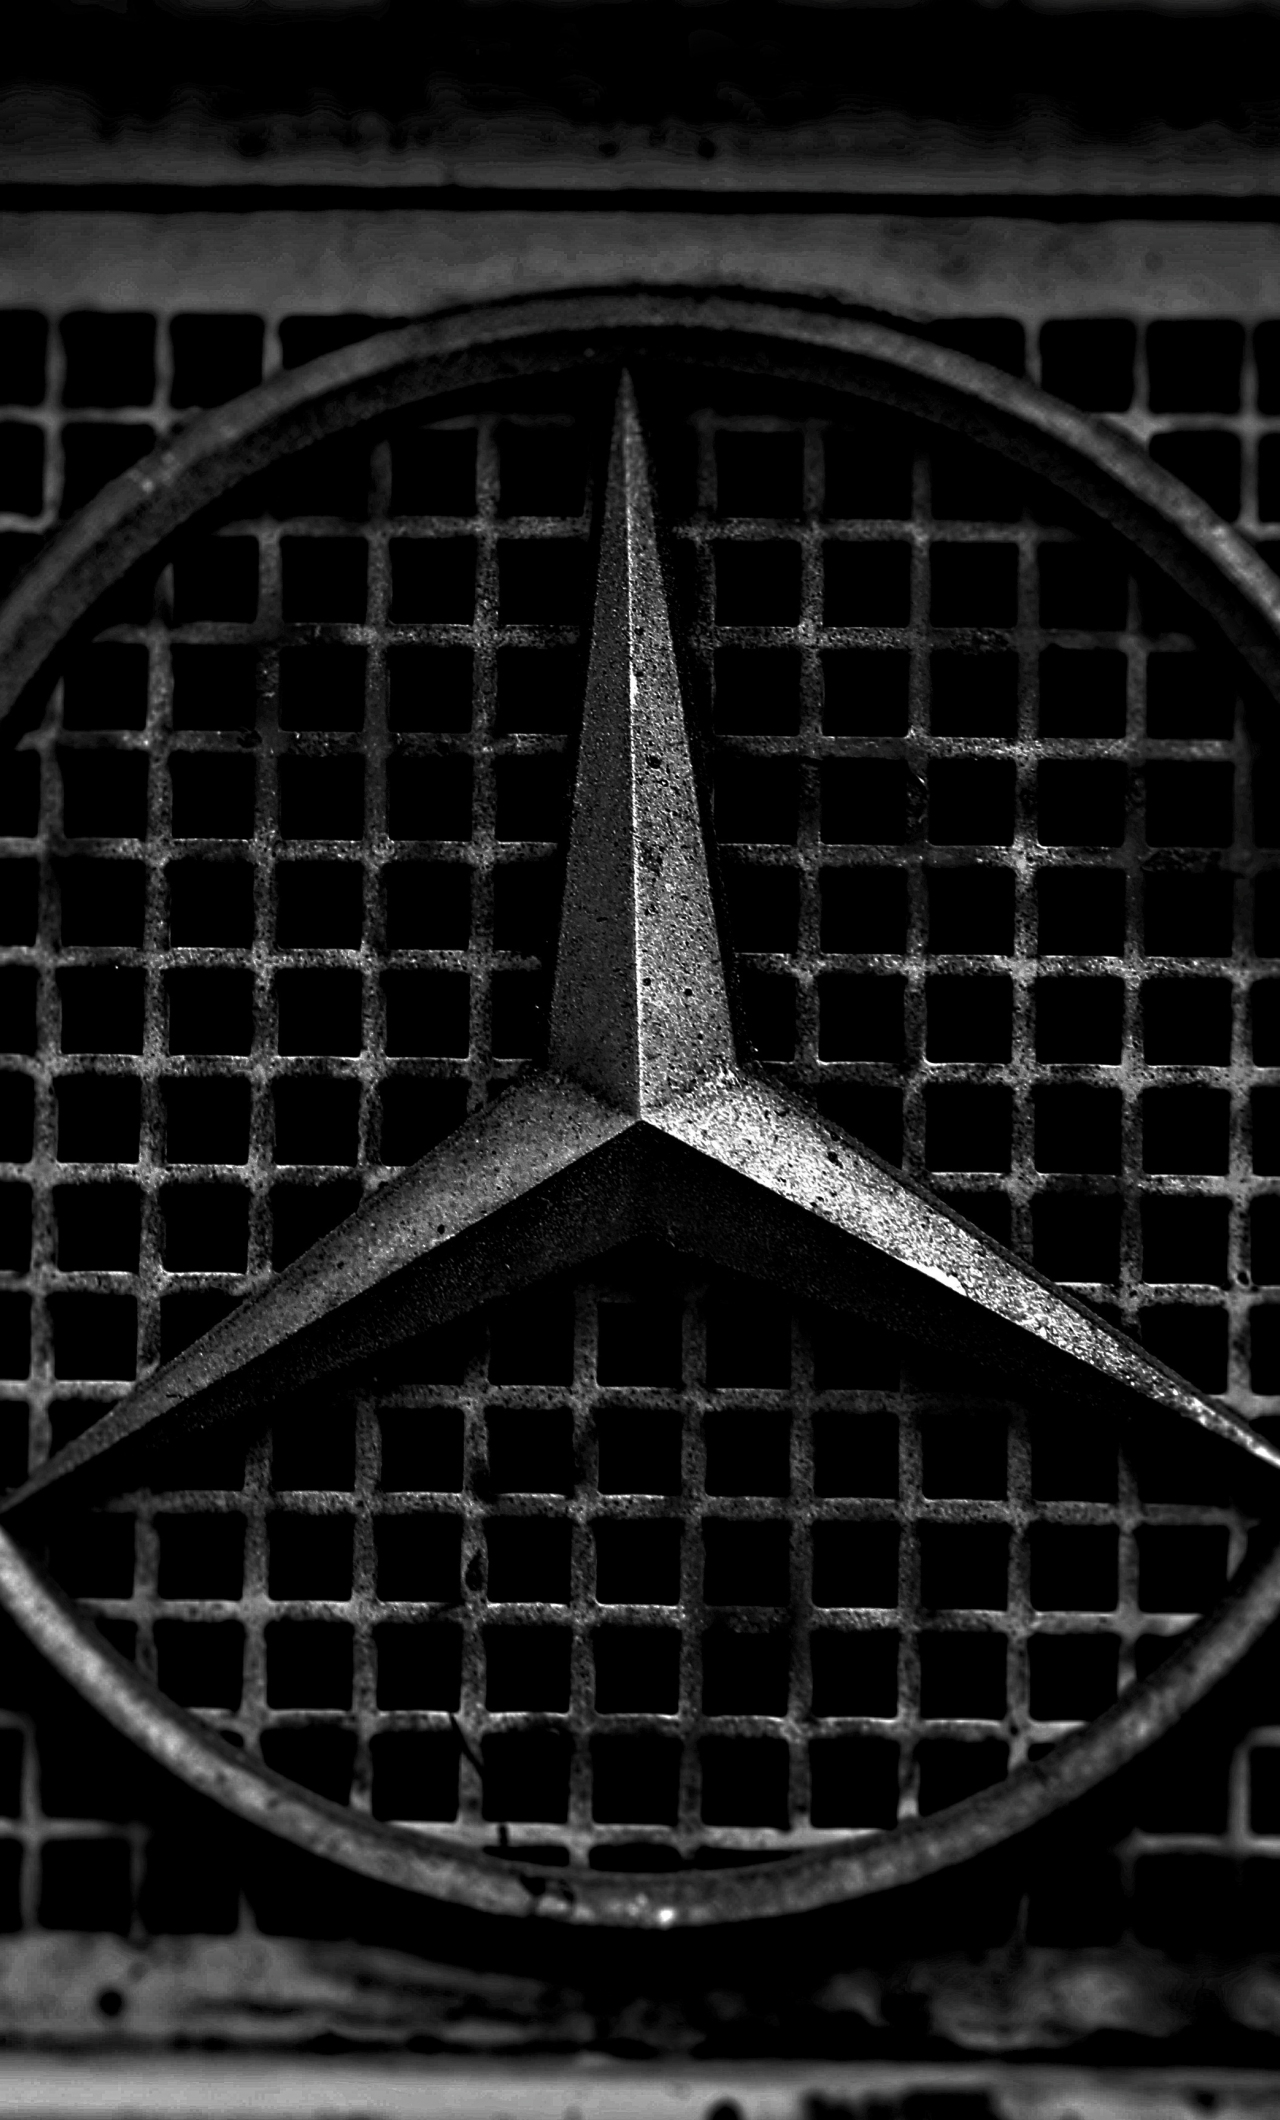 Download 1280x21 Wallpaper Old Car Mercedes Benz Logo Iphone 6 Plus 1280x21 Hd Image Background 4315